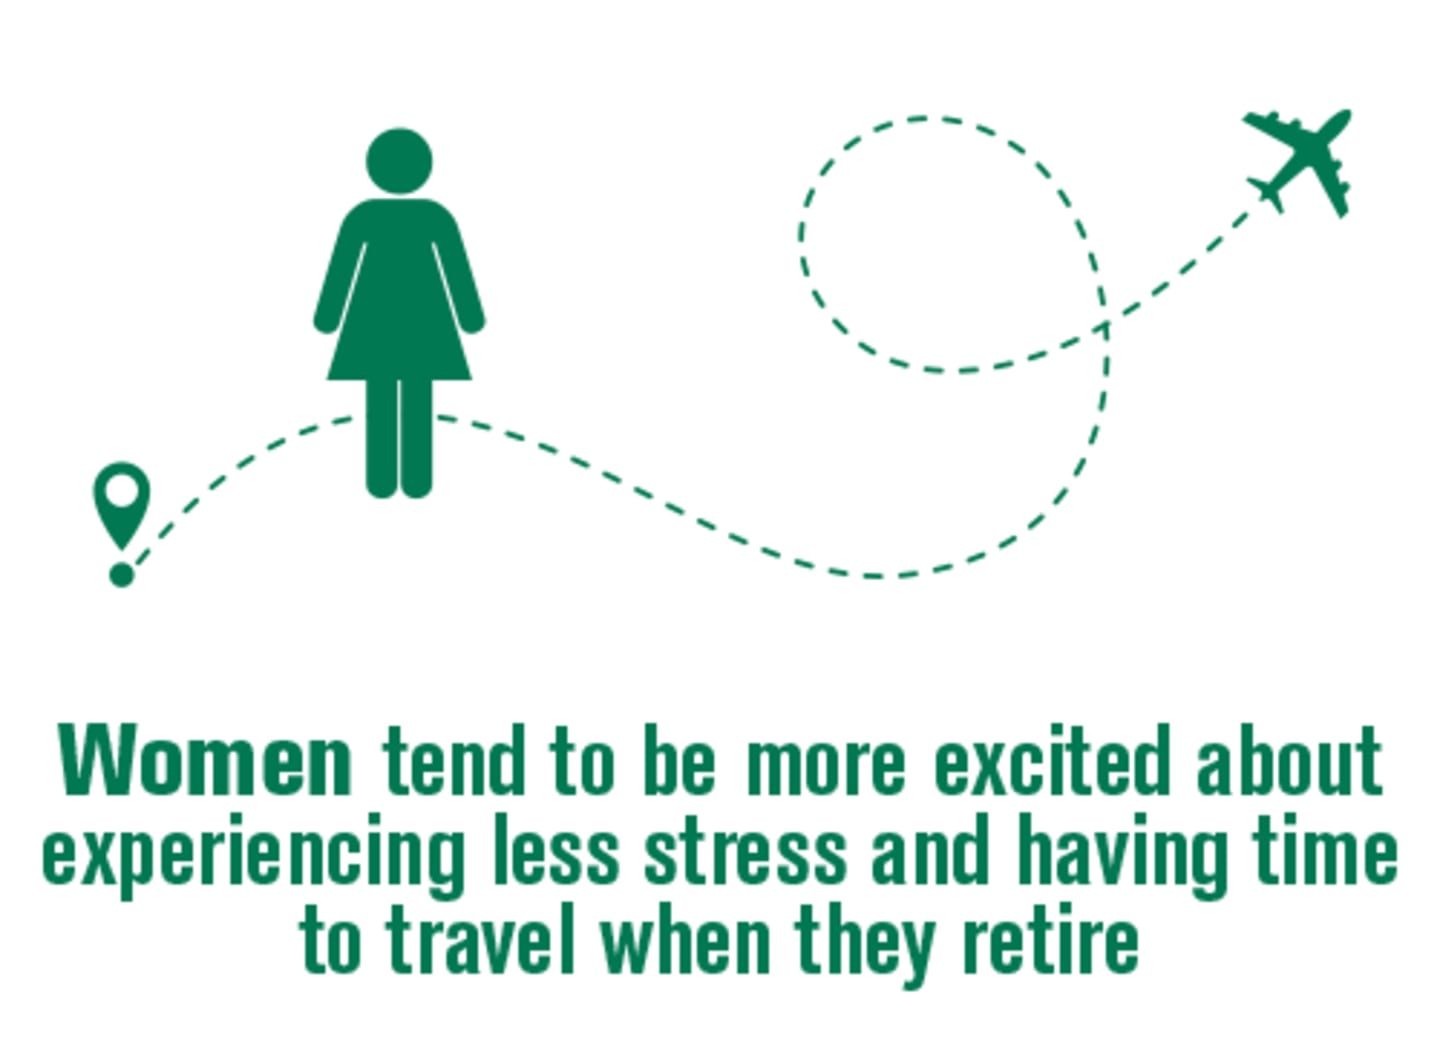 Women tend to be more excited about having less stress and time to travel.